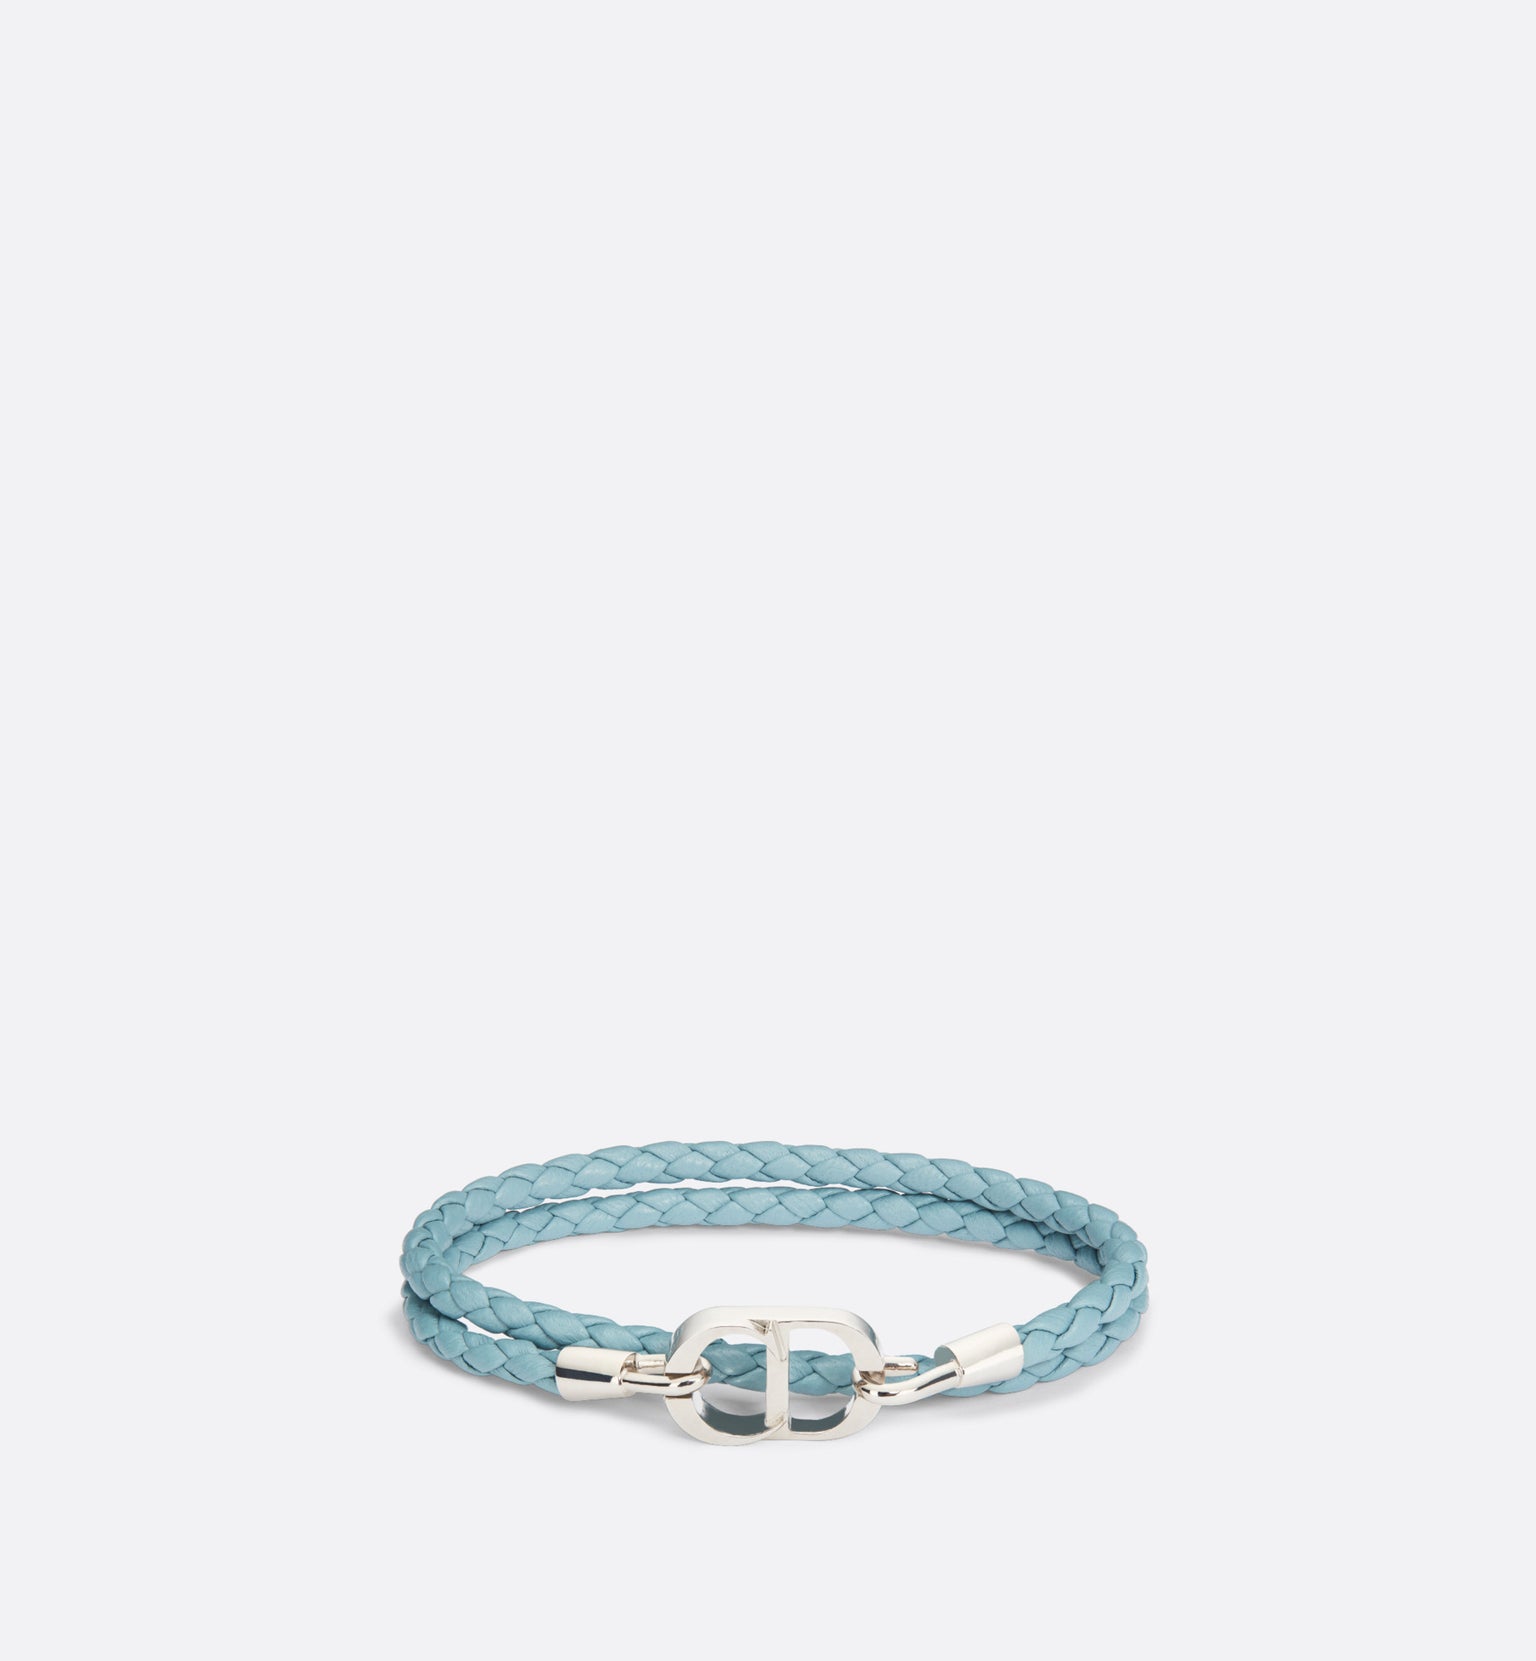 CD Icon Braided Leather Bracelet • Blue Calfskin and Silver-Finish Brass